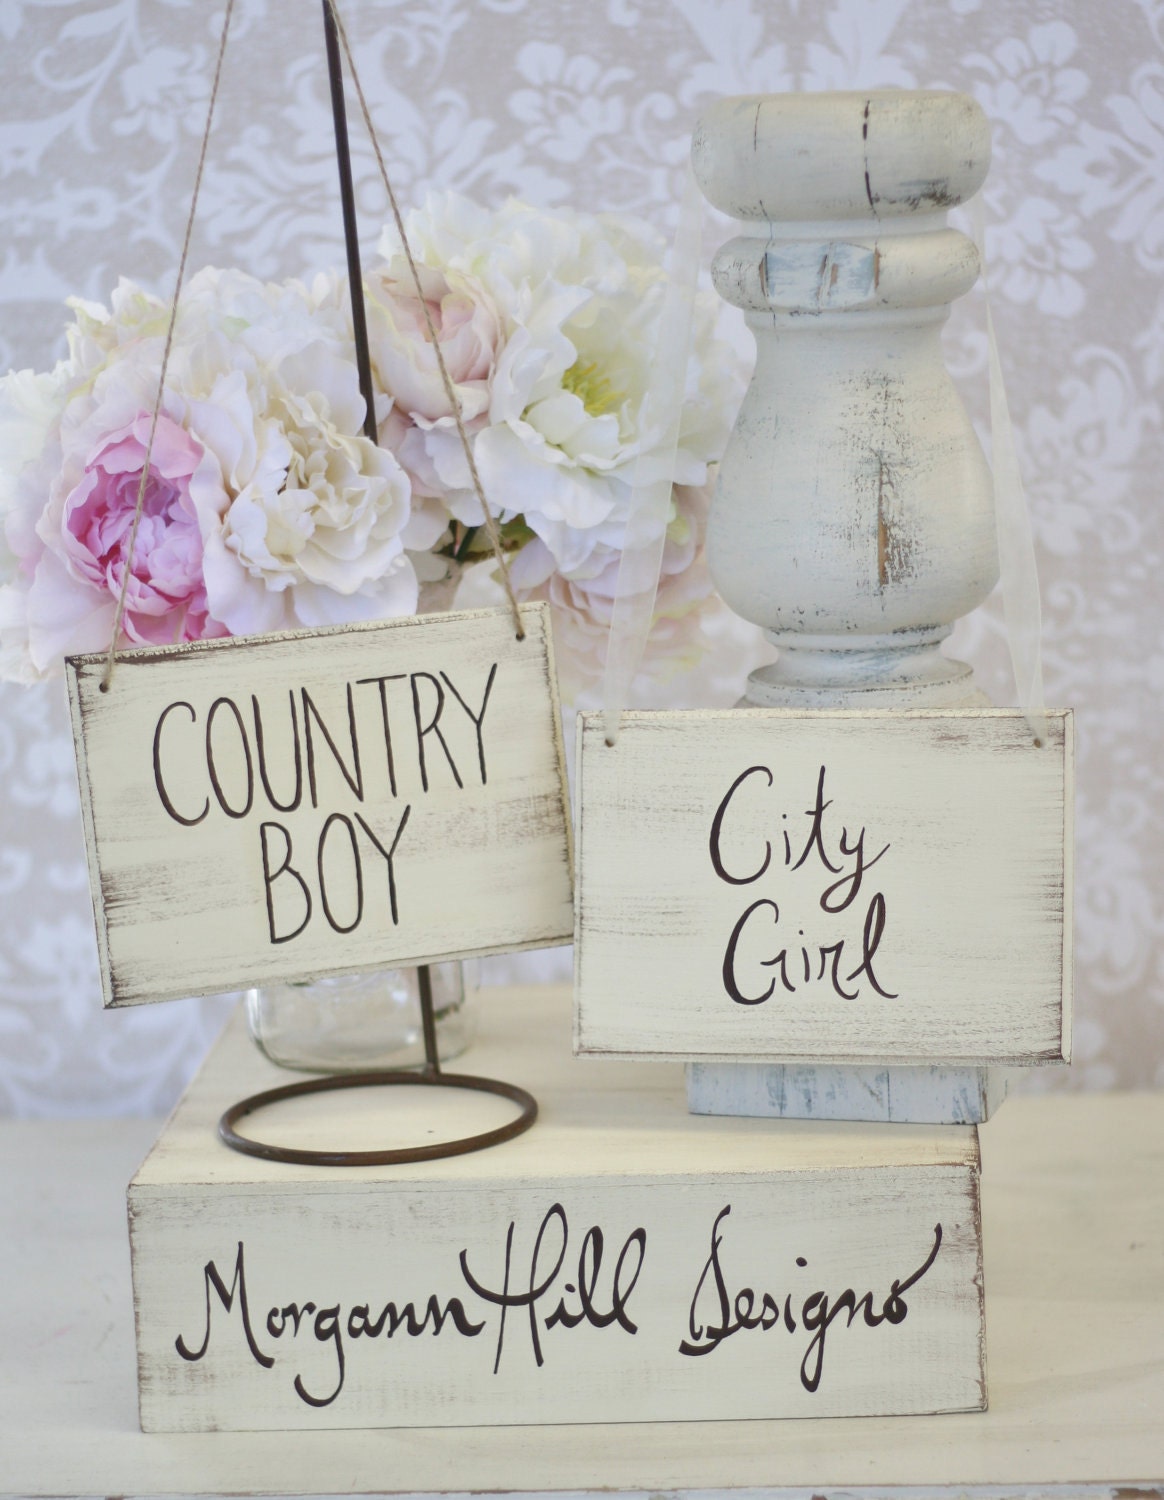 signs Signs Hill and Designs Rustic Wedding Chair Bride Morgann Chic  chic Groom rustic